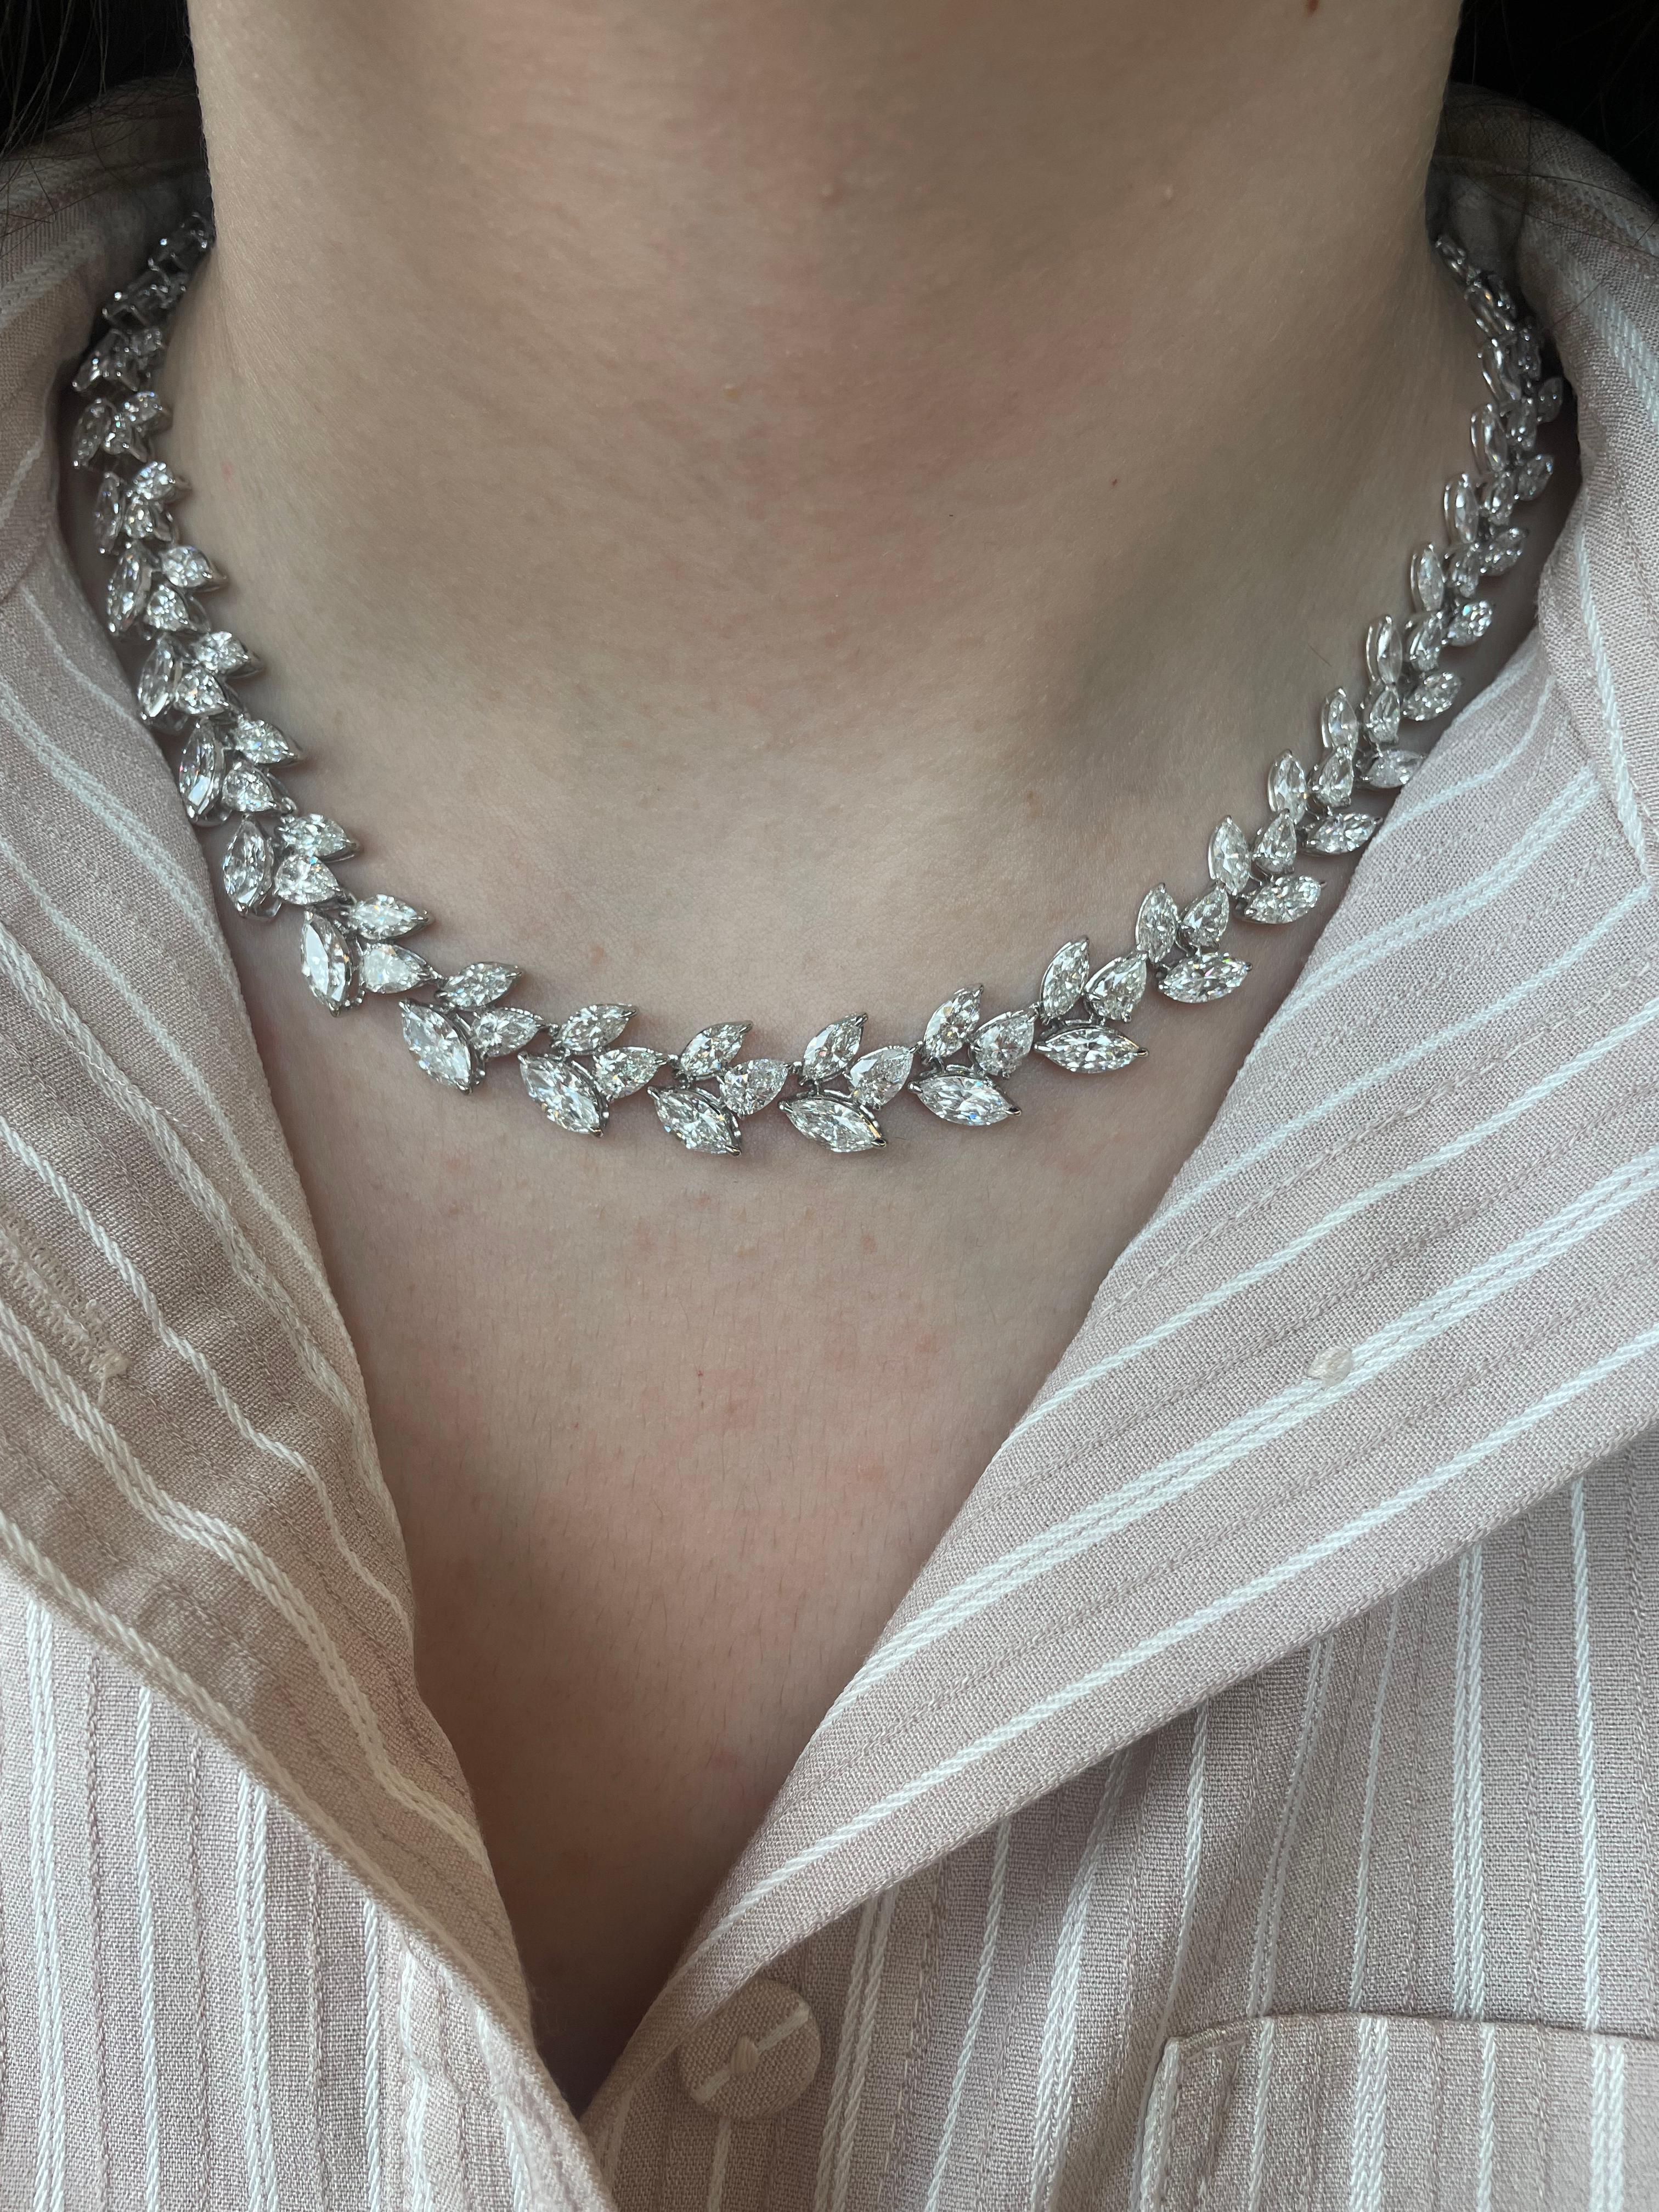 Exquisite multi diamond necklace. Perfect as a wedding / bridal necklace. High jewelry by Alexander Beverly Hills.
132 marques and pear cut diamonds, 45.35 carats total (Avg 0.34ct). Approximately F-H color and VVS-VS clarity. Prong set in 18k white